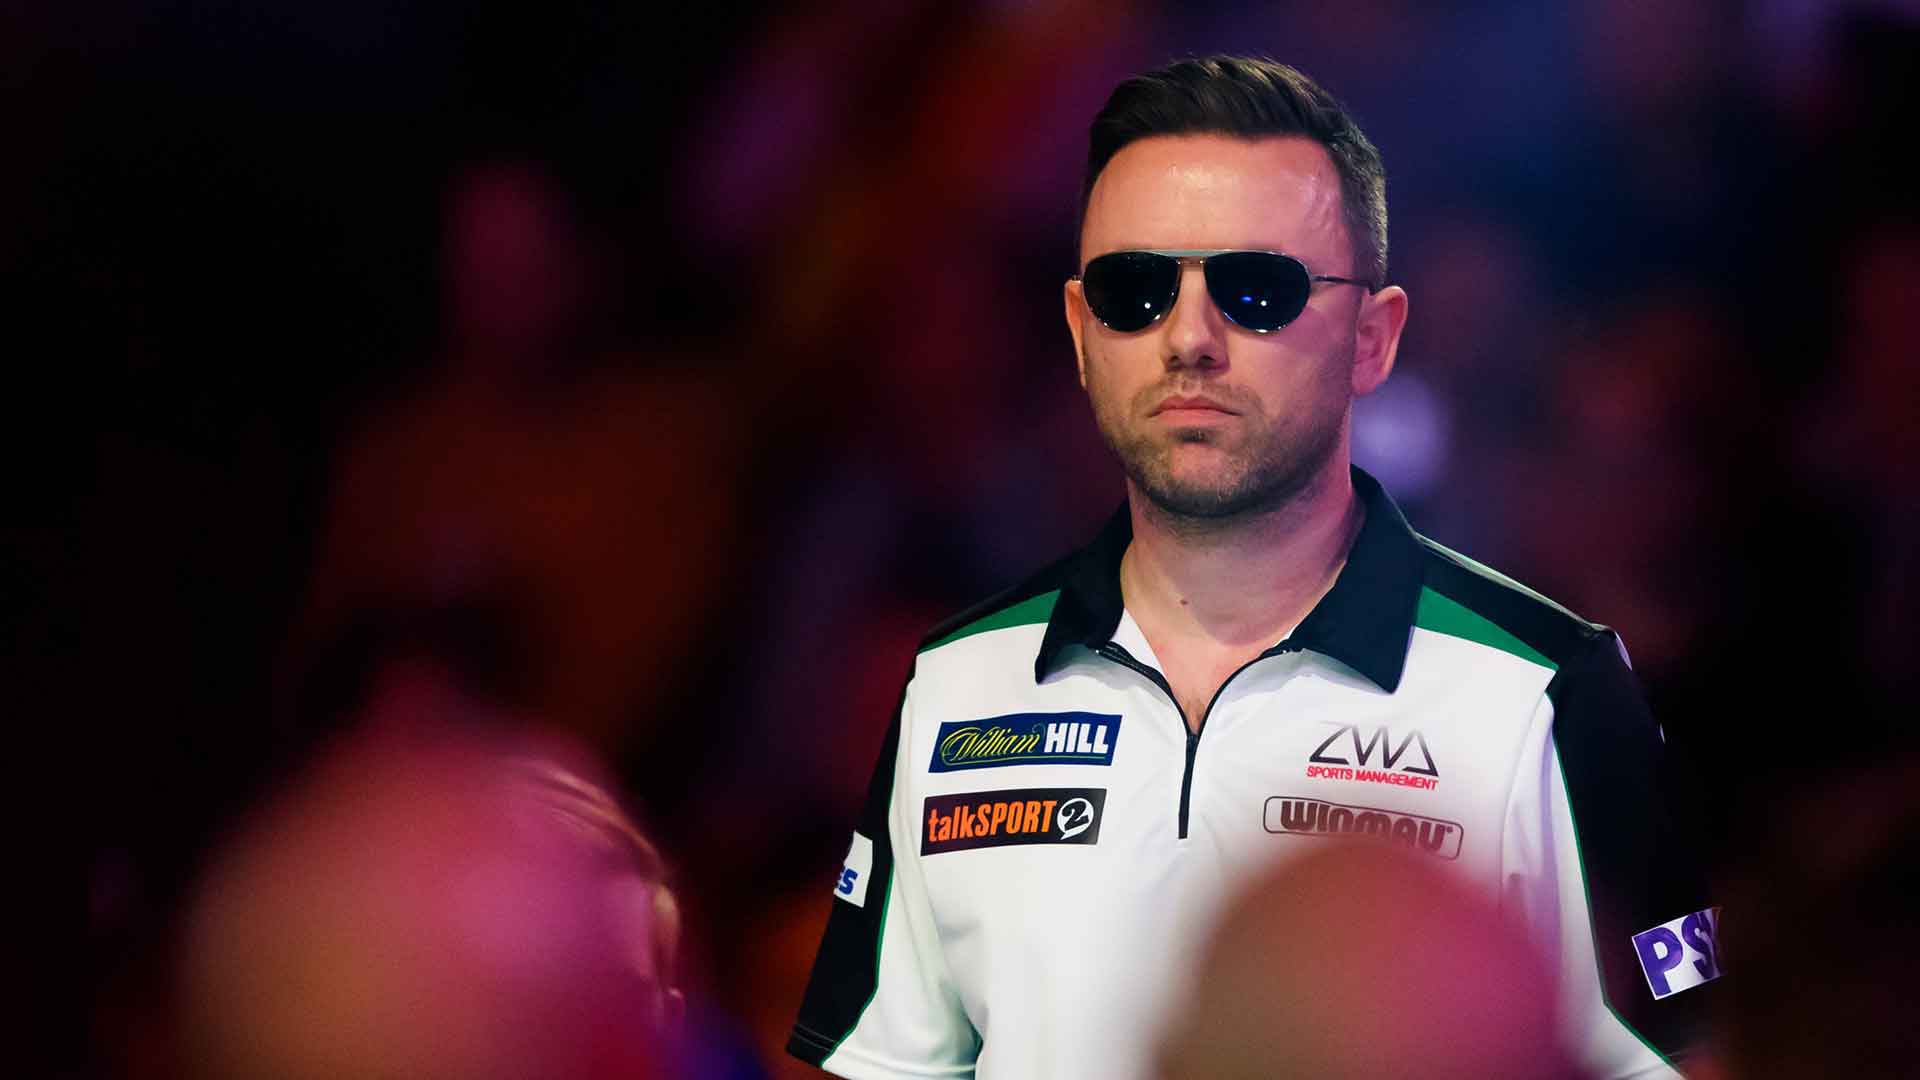 at tilbagetrække noget Mangler Paul Nicholson on his return to competitive darts, Q School commitment and  the dilemma of juggling punditry with a playing career